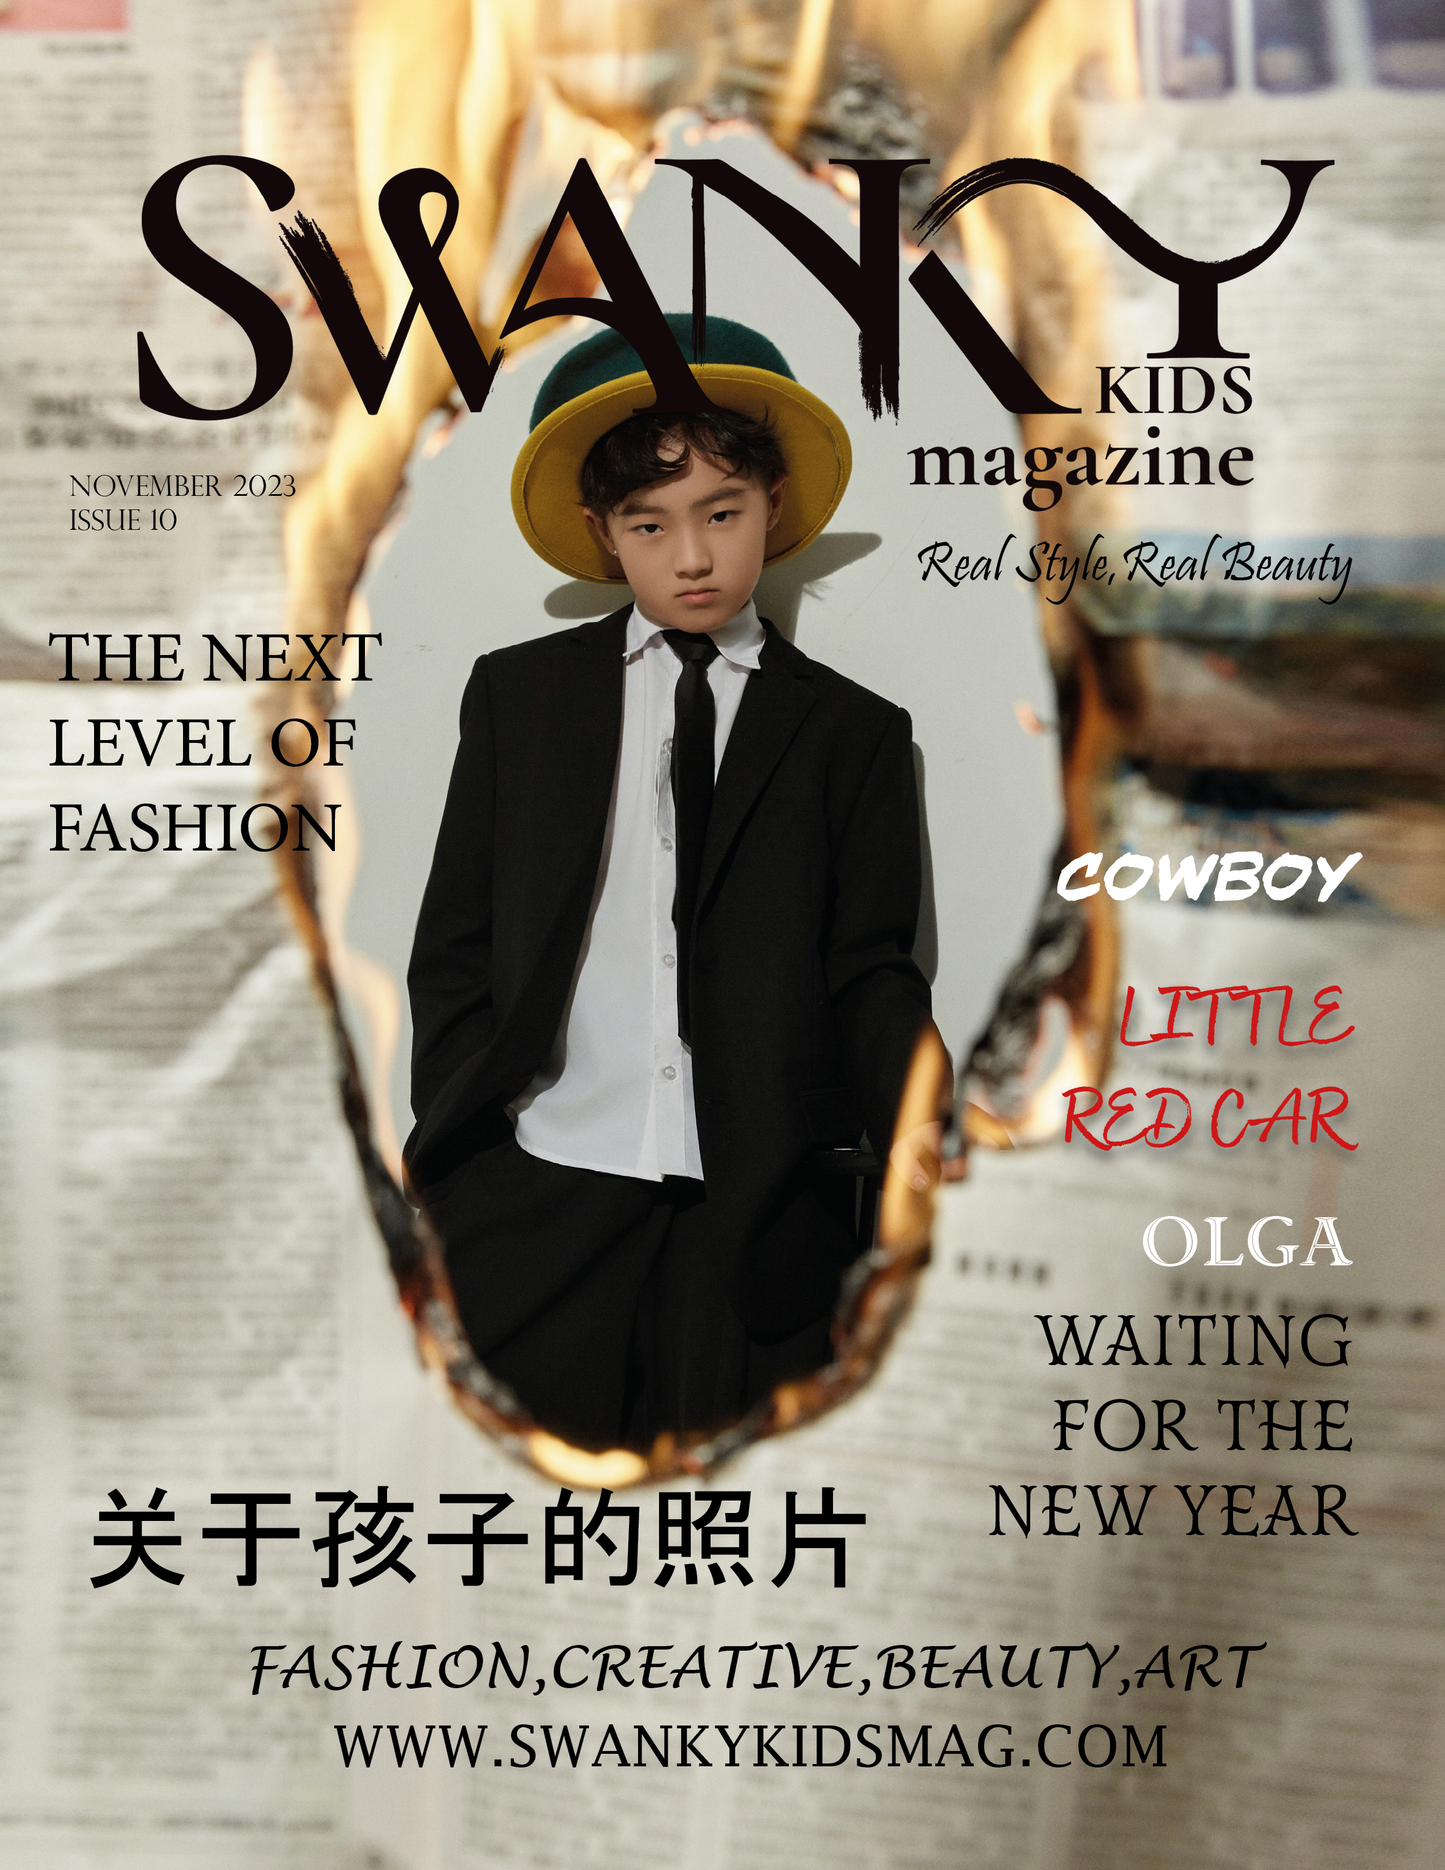 Swanky Kids Magazine - November 2023: The Swanky Kids and Teens Edition Issue X